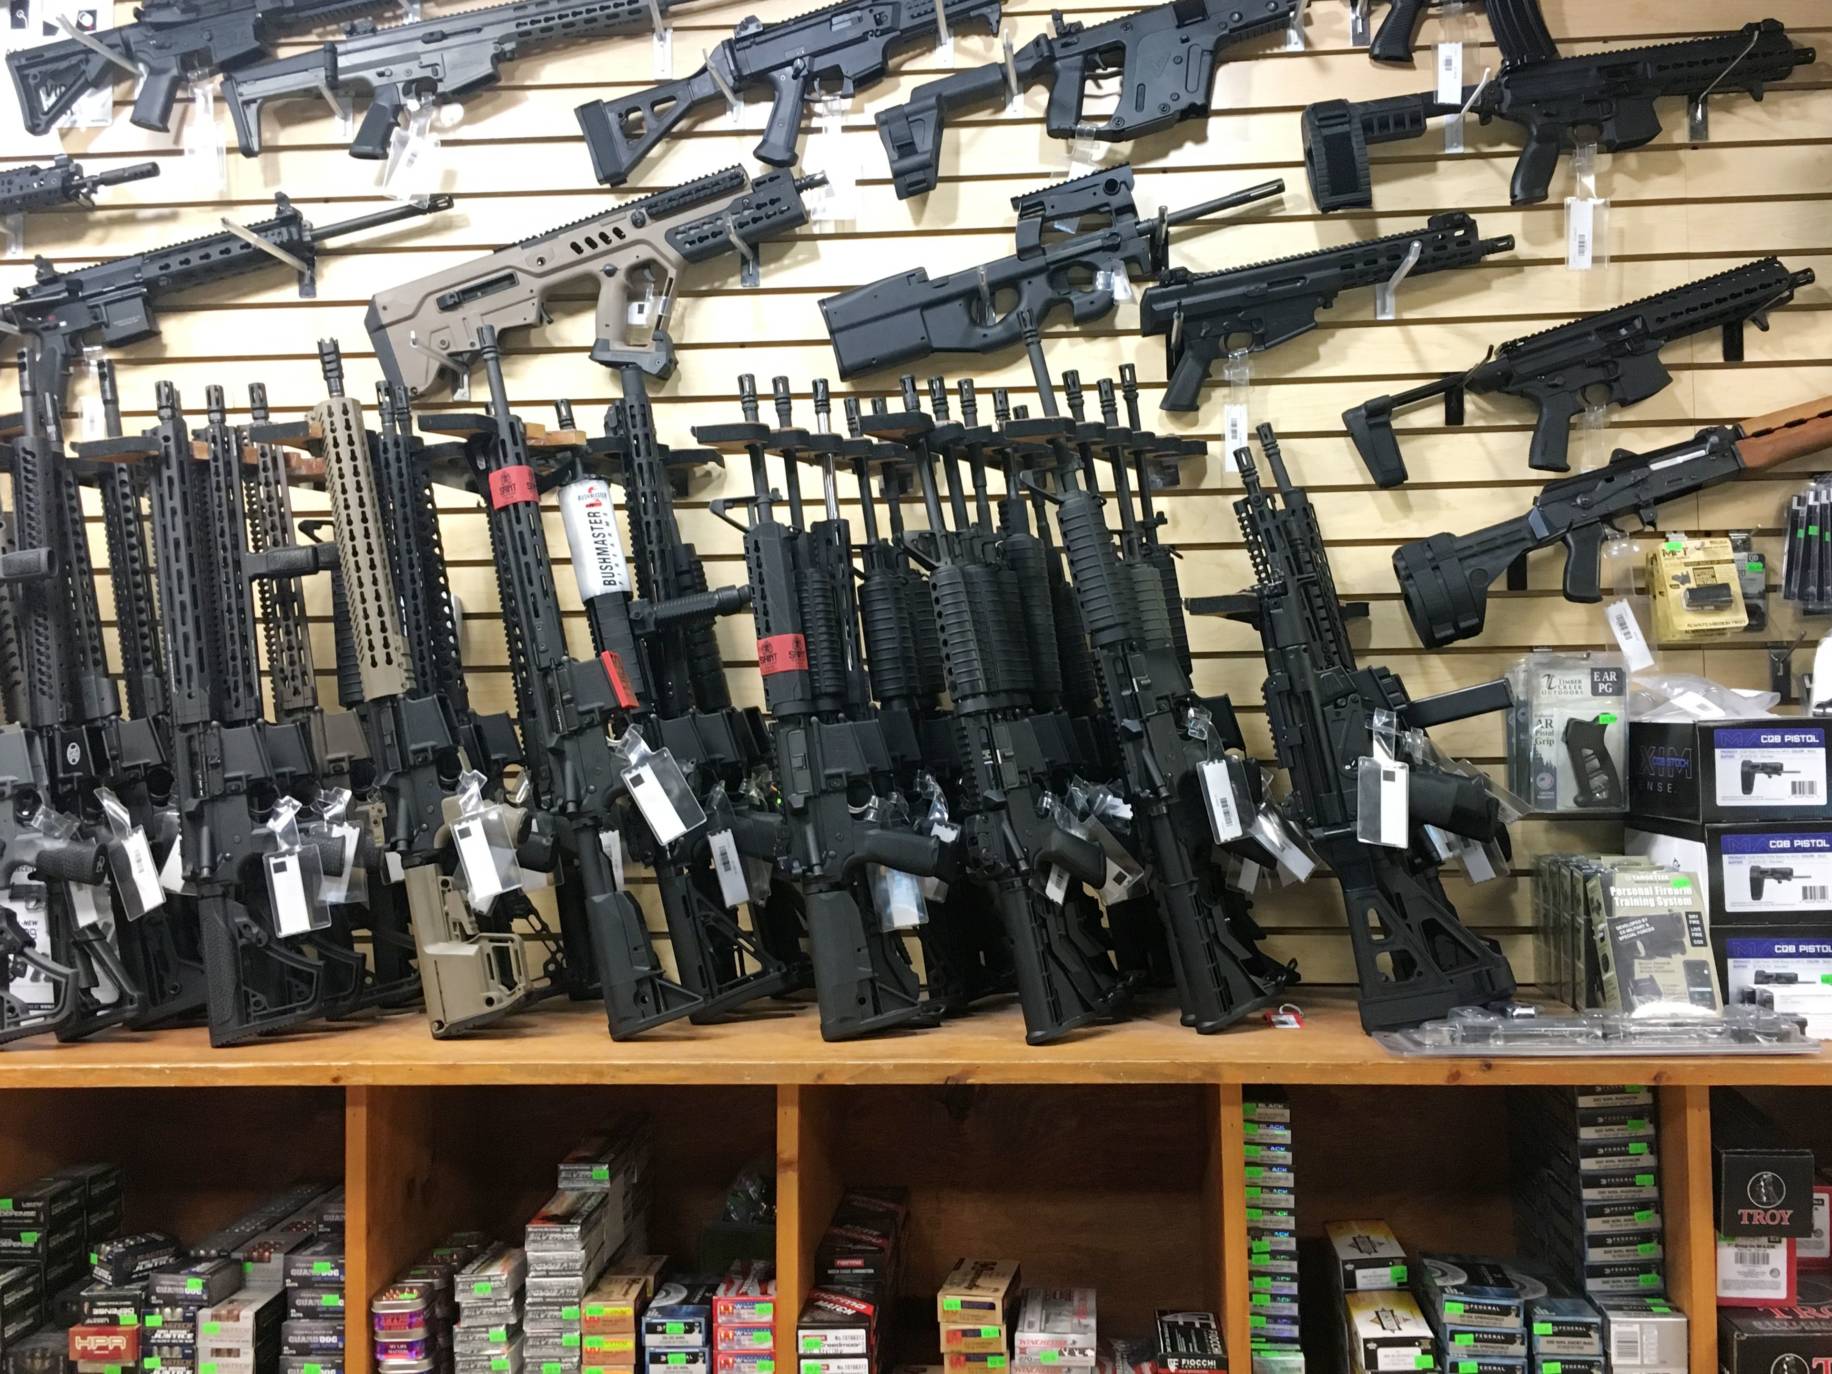 California Has Some of the Nation's Strictest Gun Laws. Are They Working?